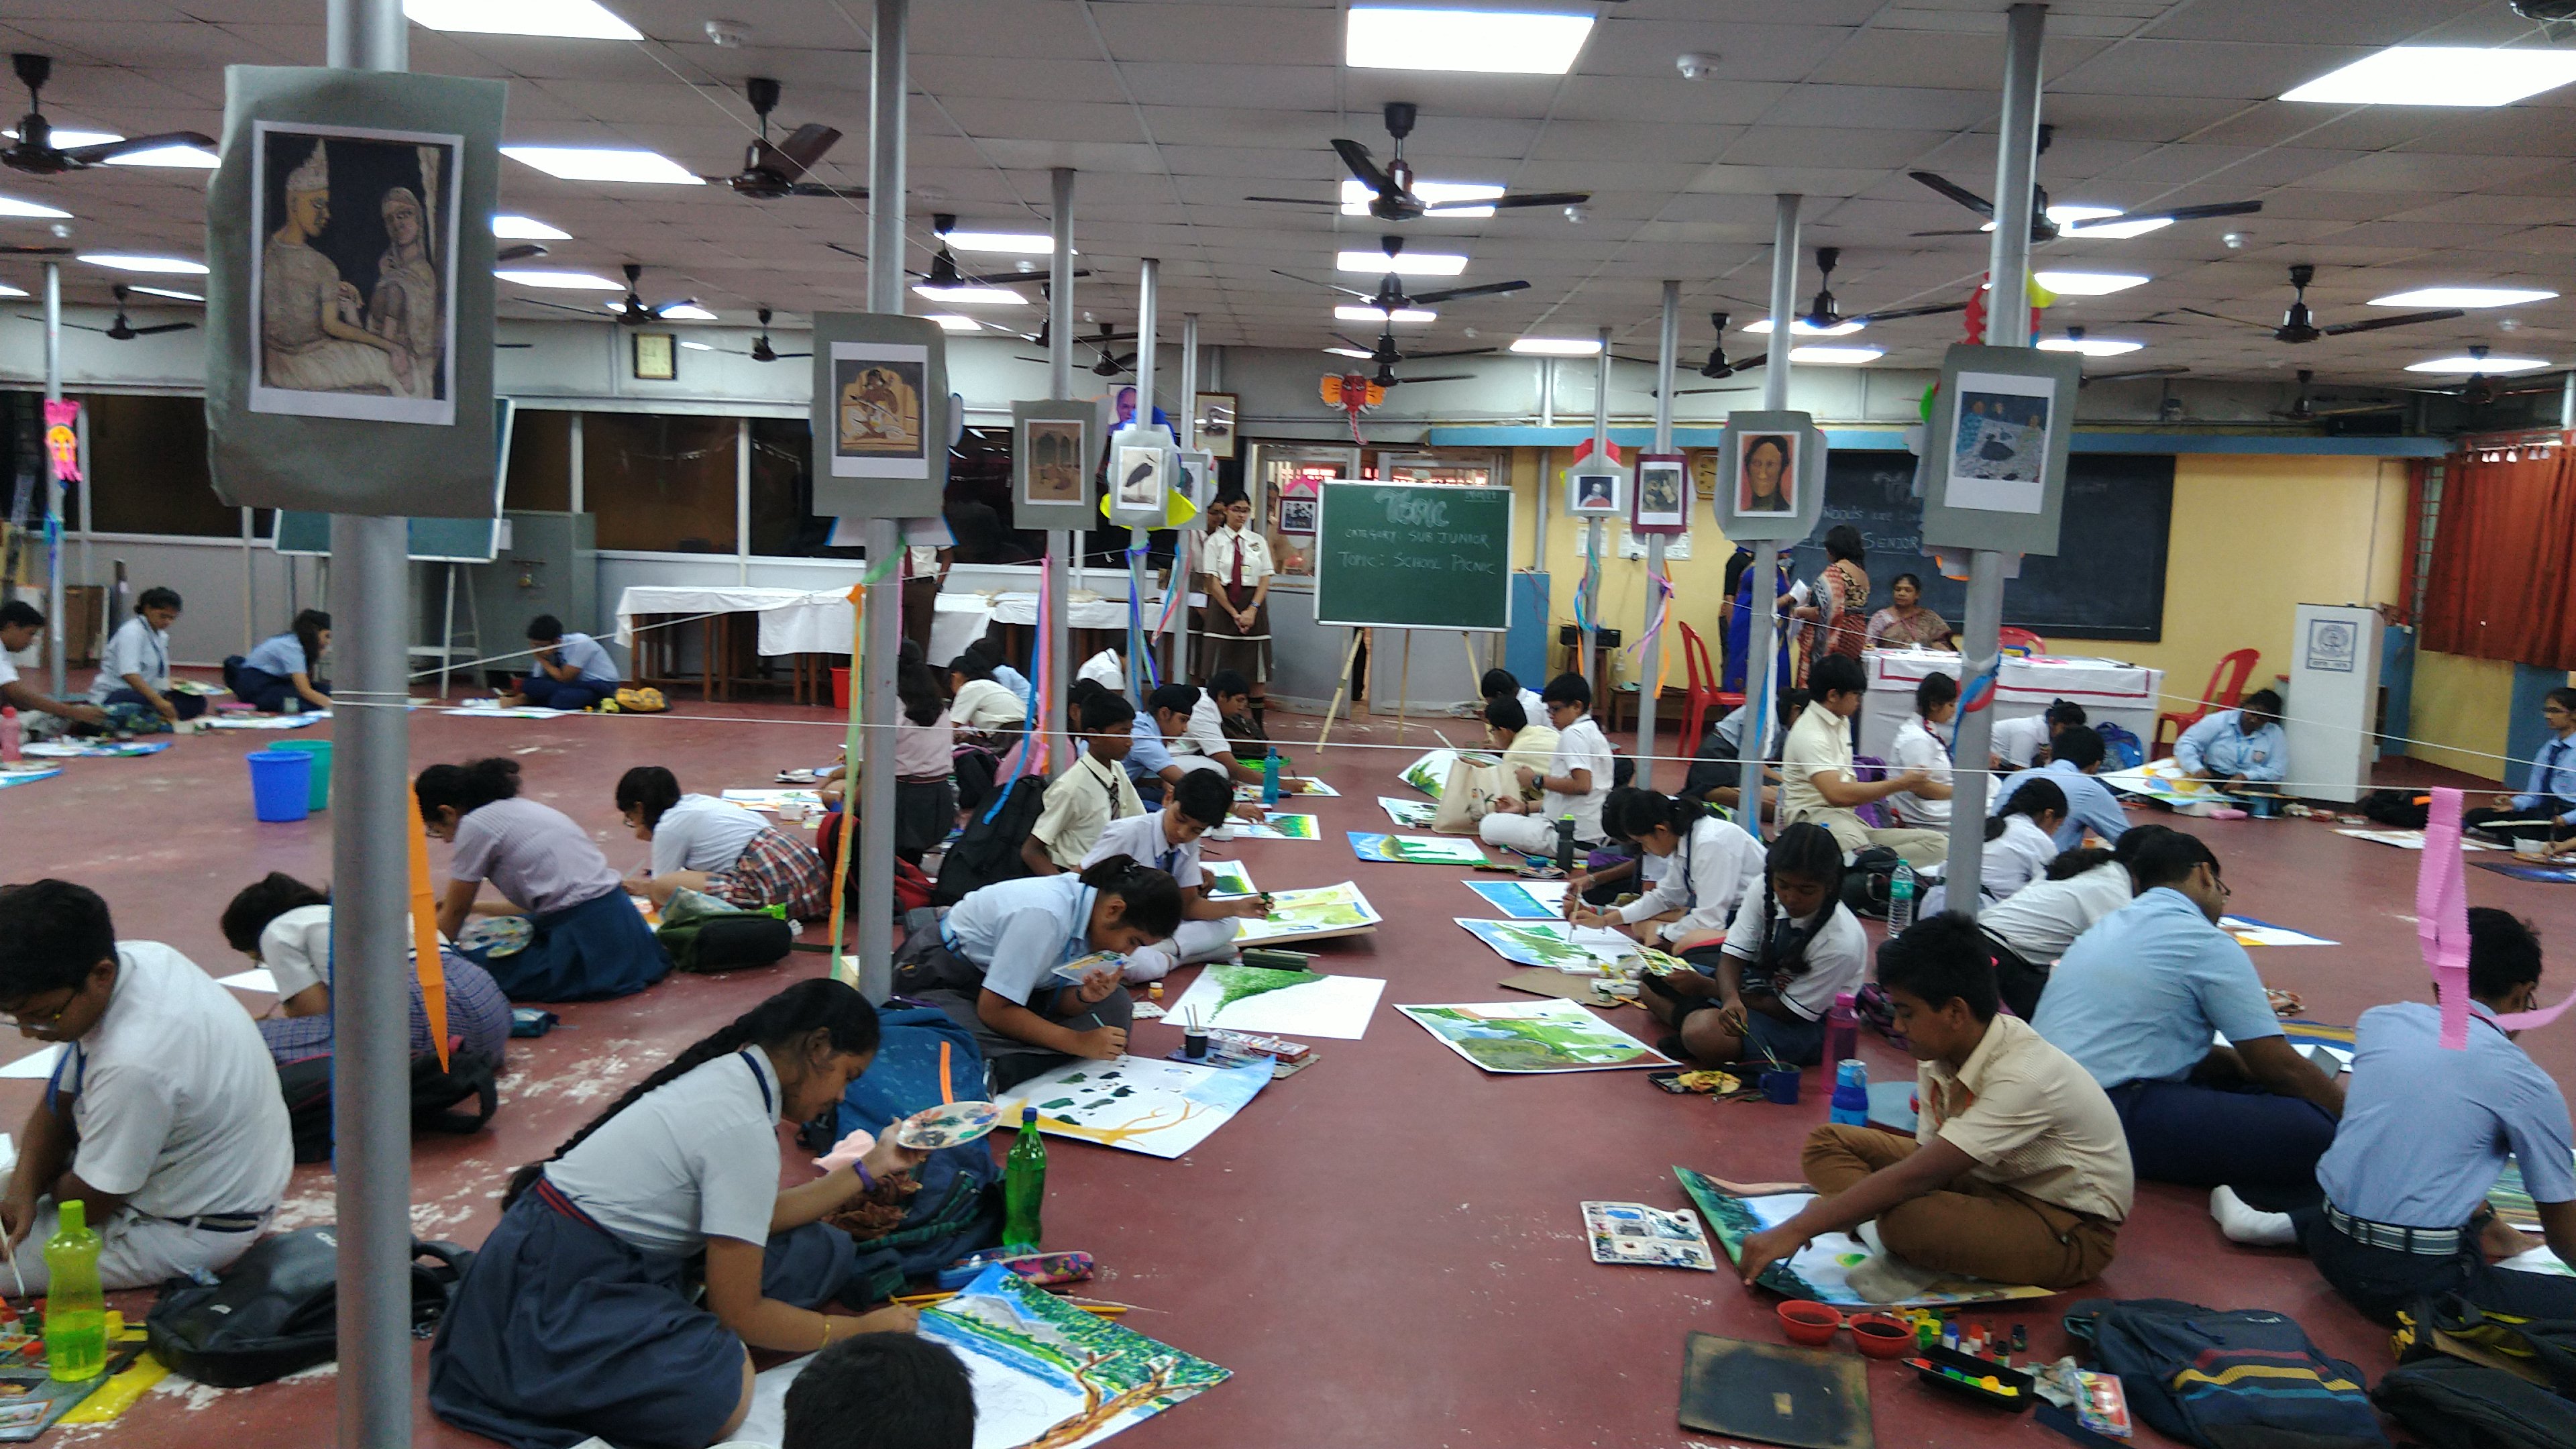 ASISC REGIONAL PAINTING COMPETITION - 2019